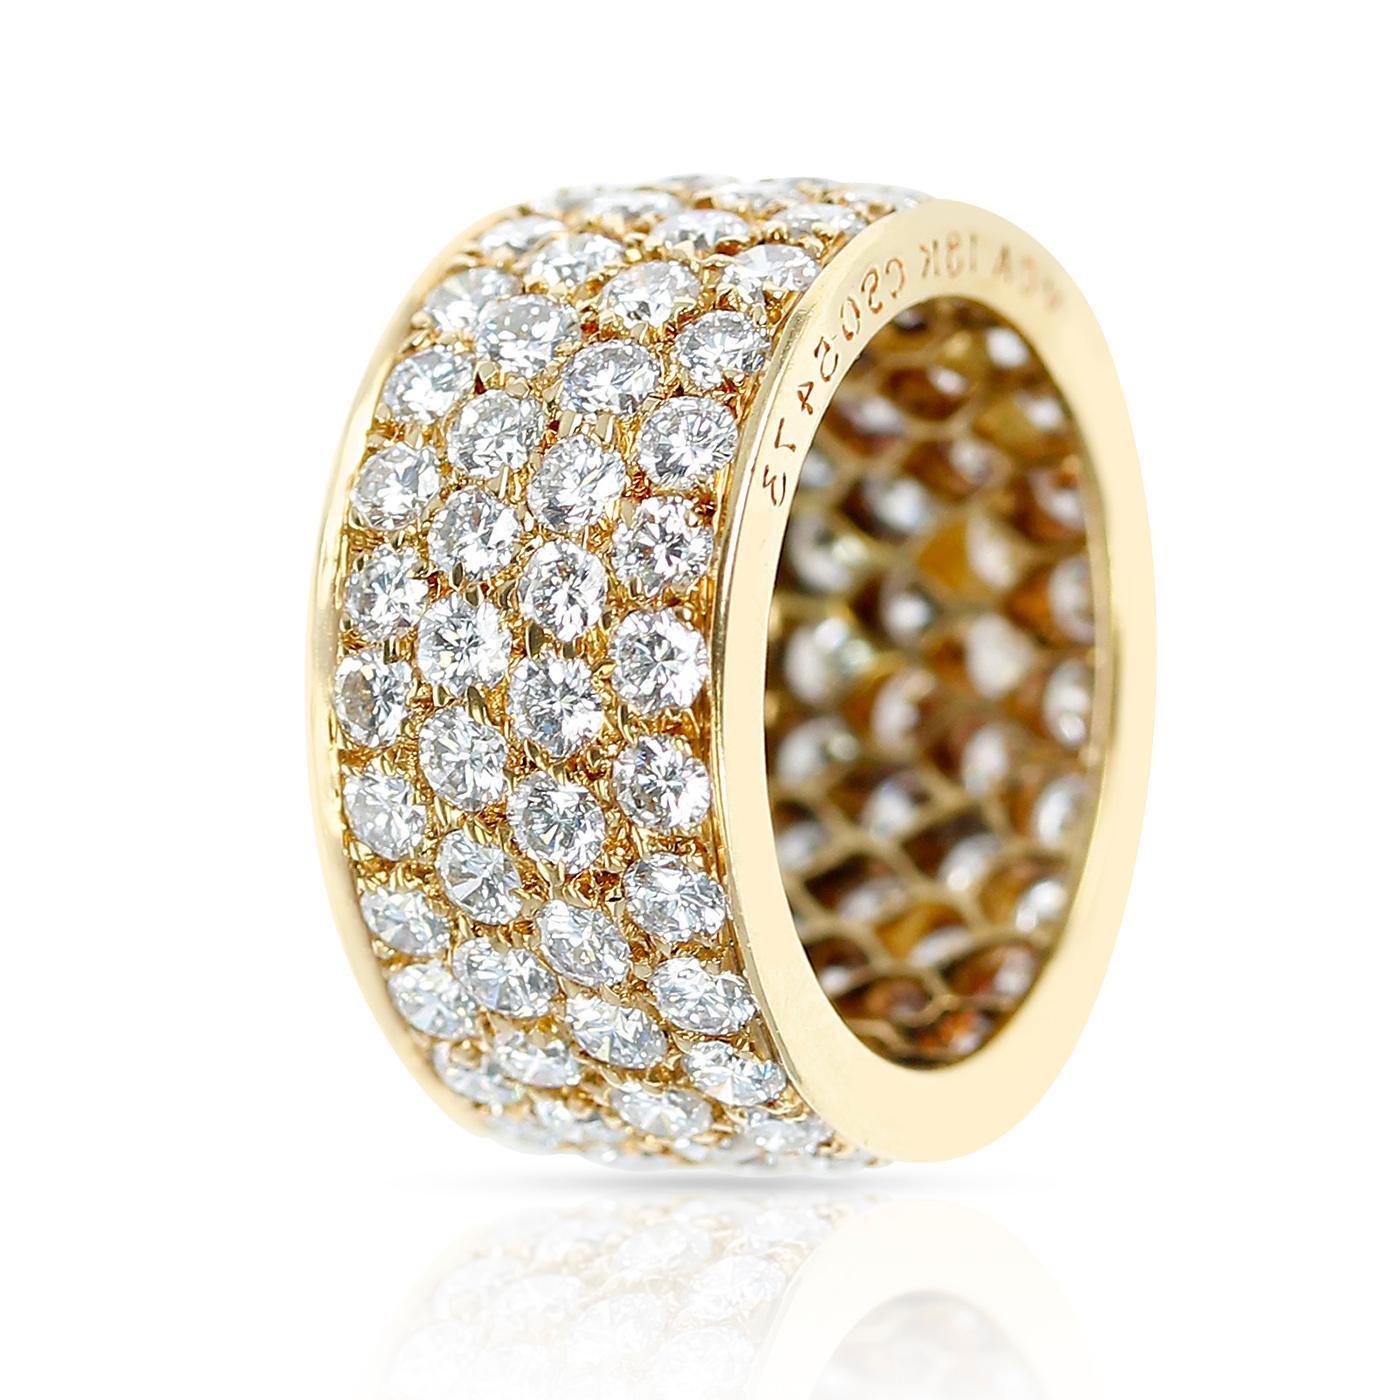 A Van Cleef & Arpels Four Row Diamond Band made in 18 Karat Yellow Gold. Ring Size 5.25 US. Total Weight: 7.55 grams. 